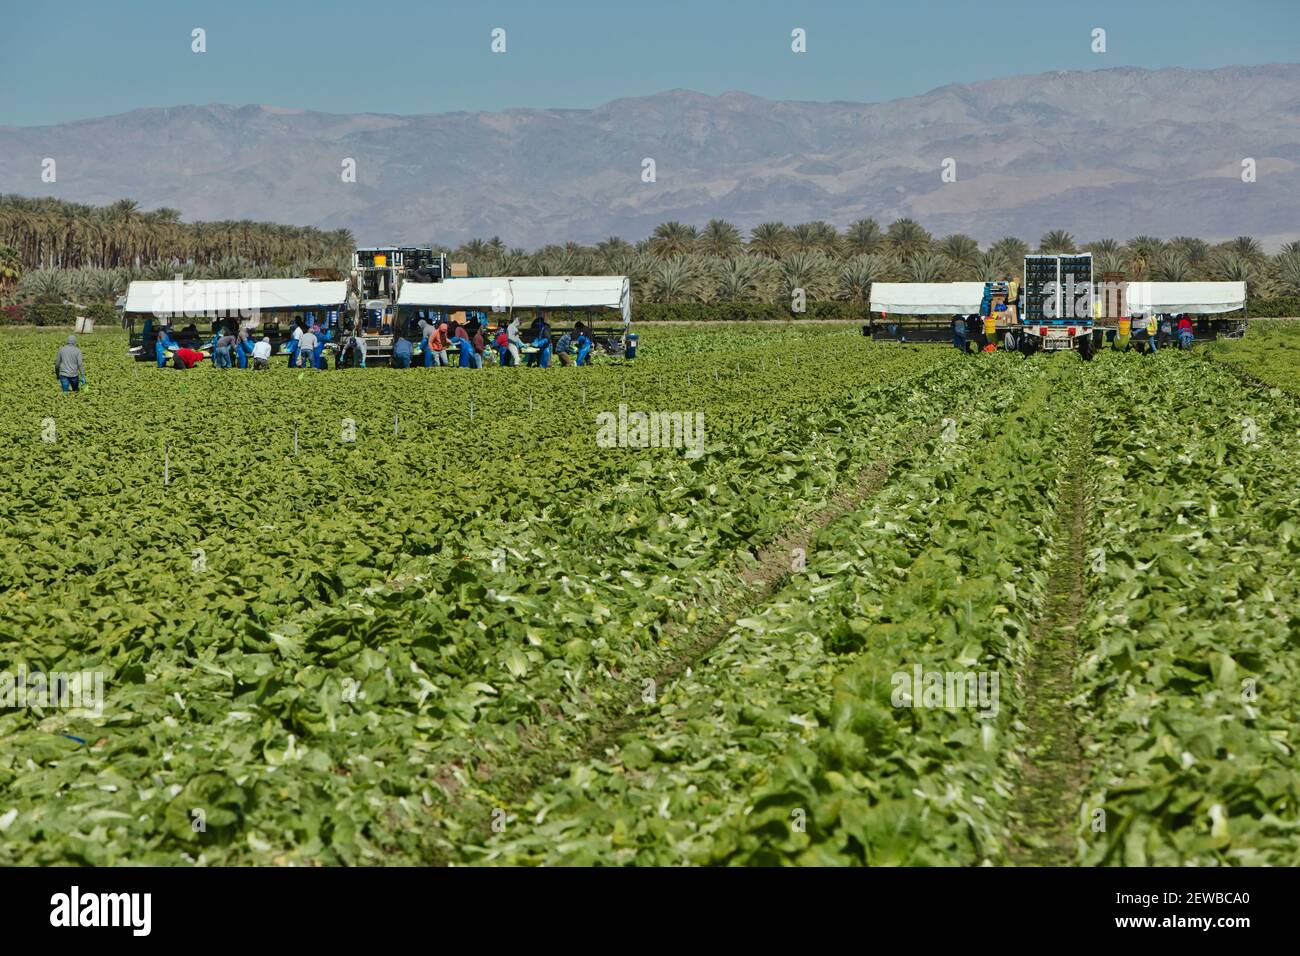 Field workers harvesting & packing  Organic Romaine Lettuce 'Lactuca sativa', Date Palm plantation in background. Stock Photo